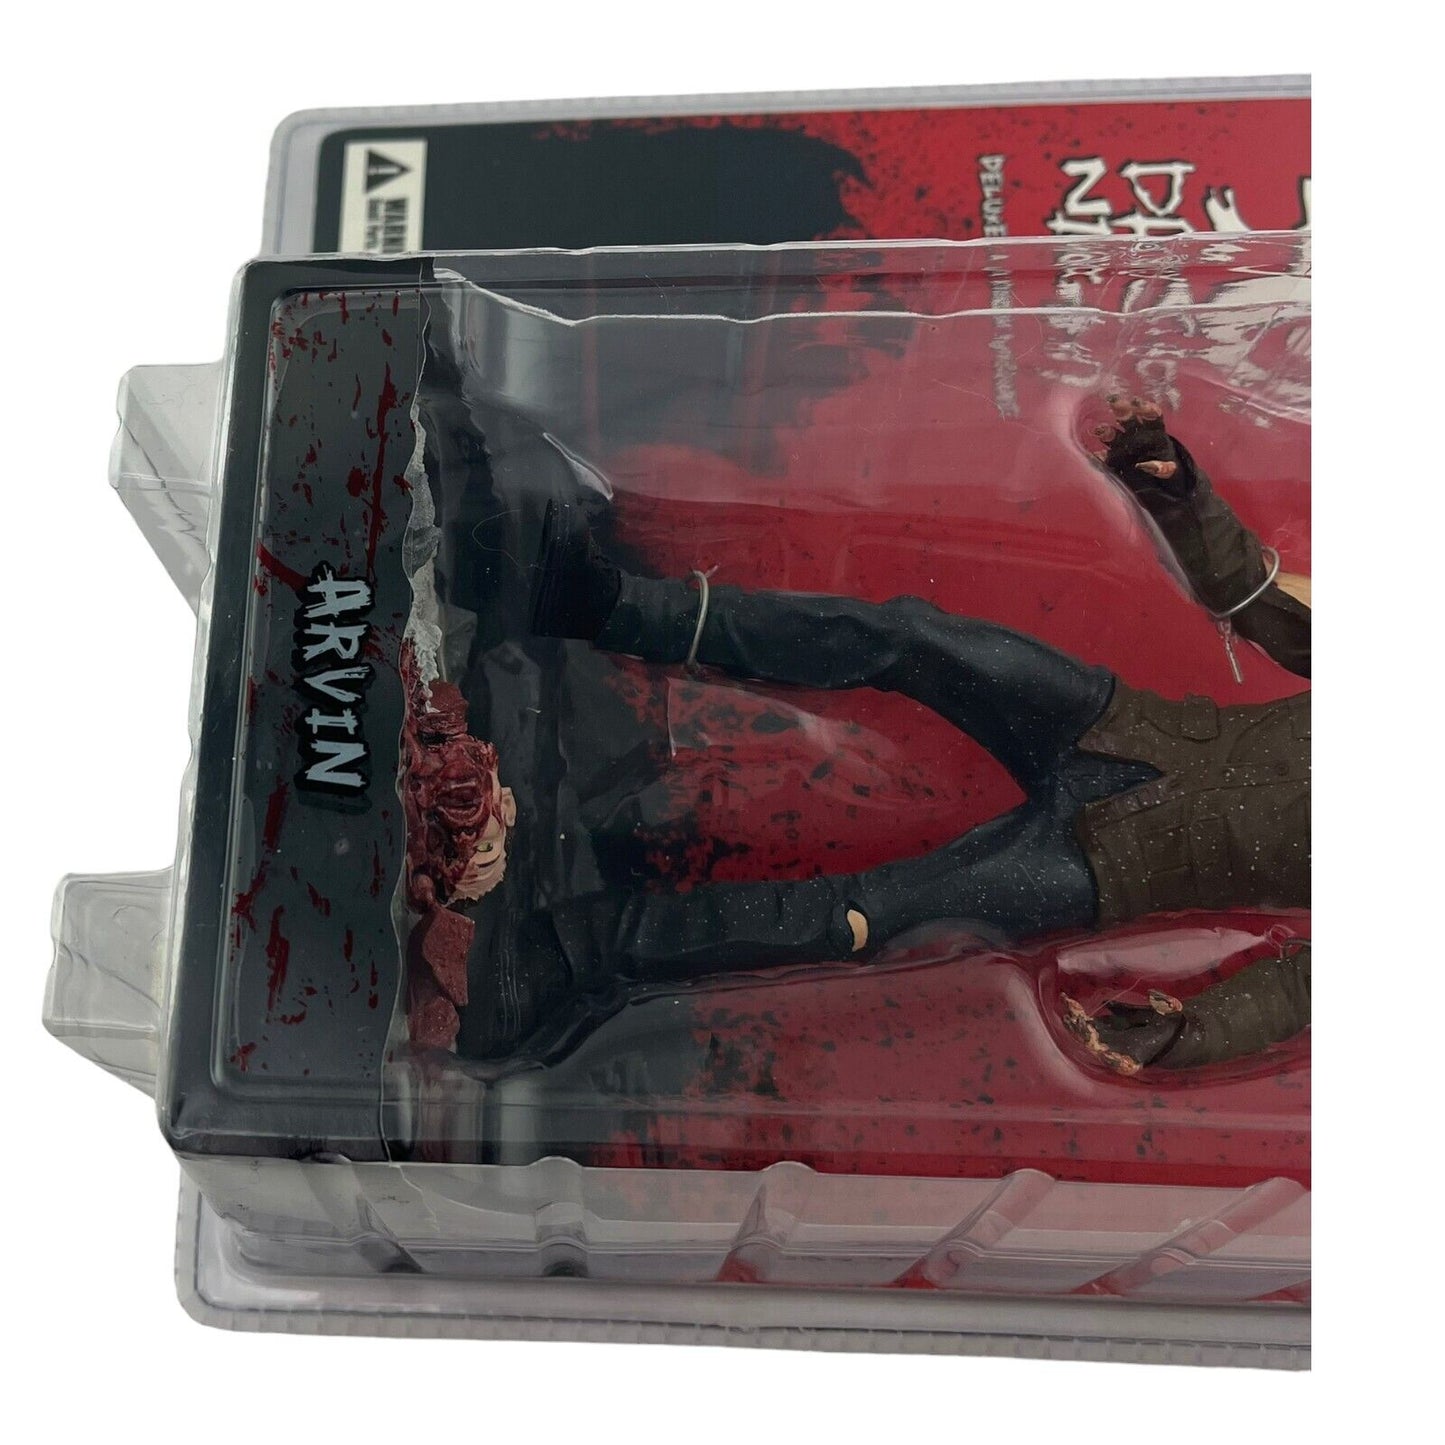 30 Days of Night Arvin Horror Action Figure 2009 Gentle Giant